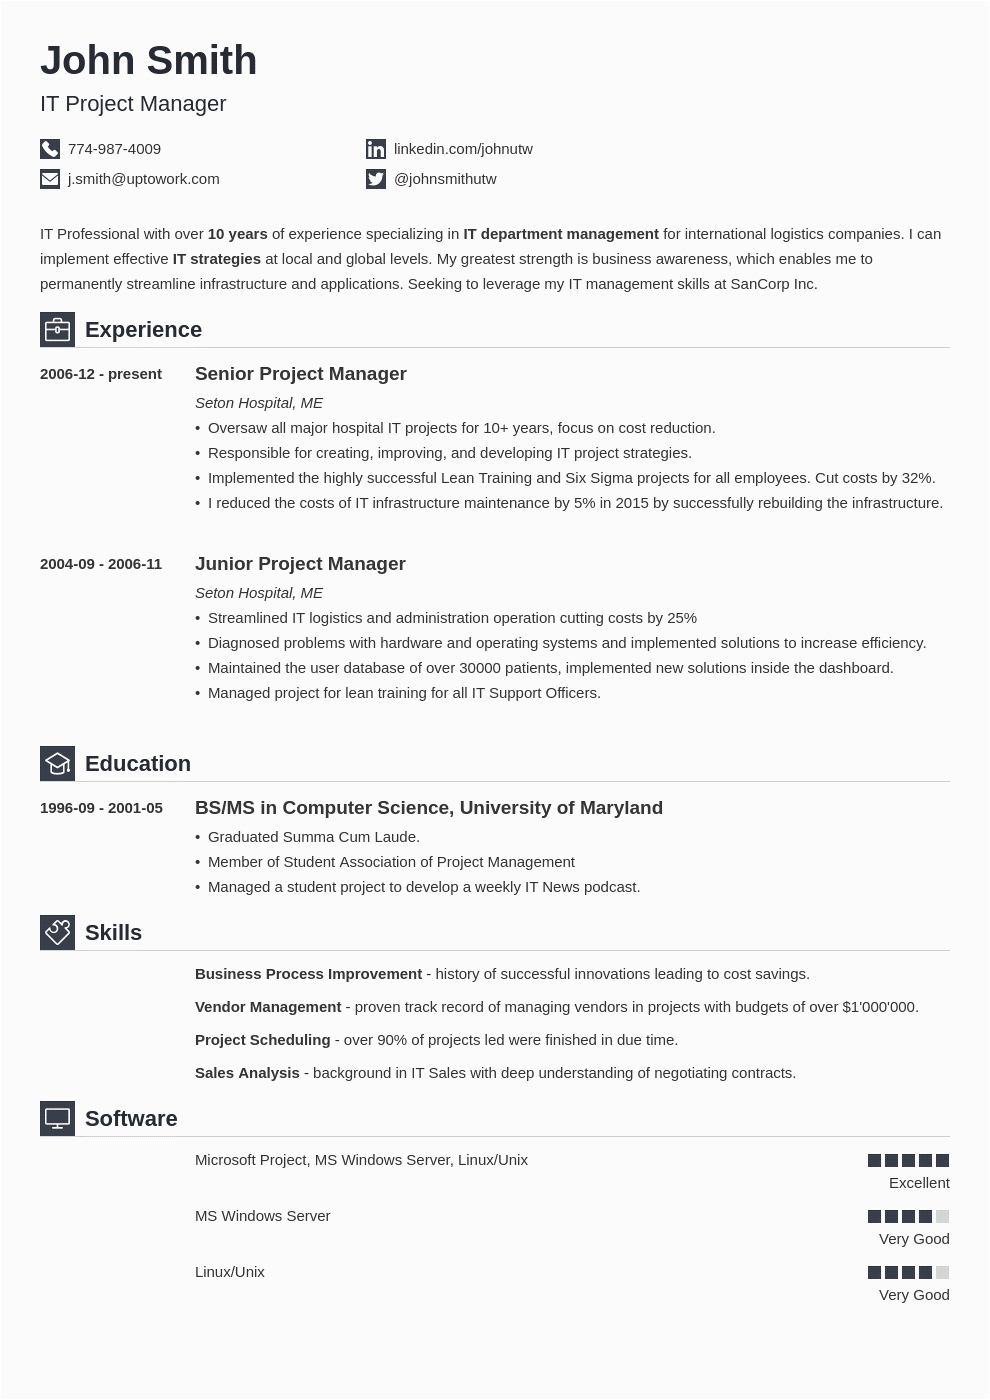 Resume Templates for Experienced It Professionals Free Download Simple Resume Templates [16 Basic formats to Download]